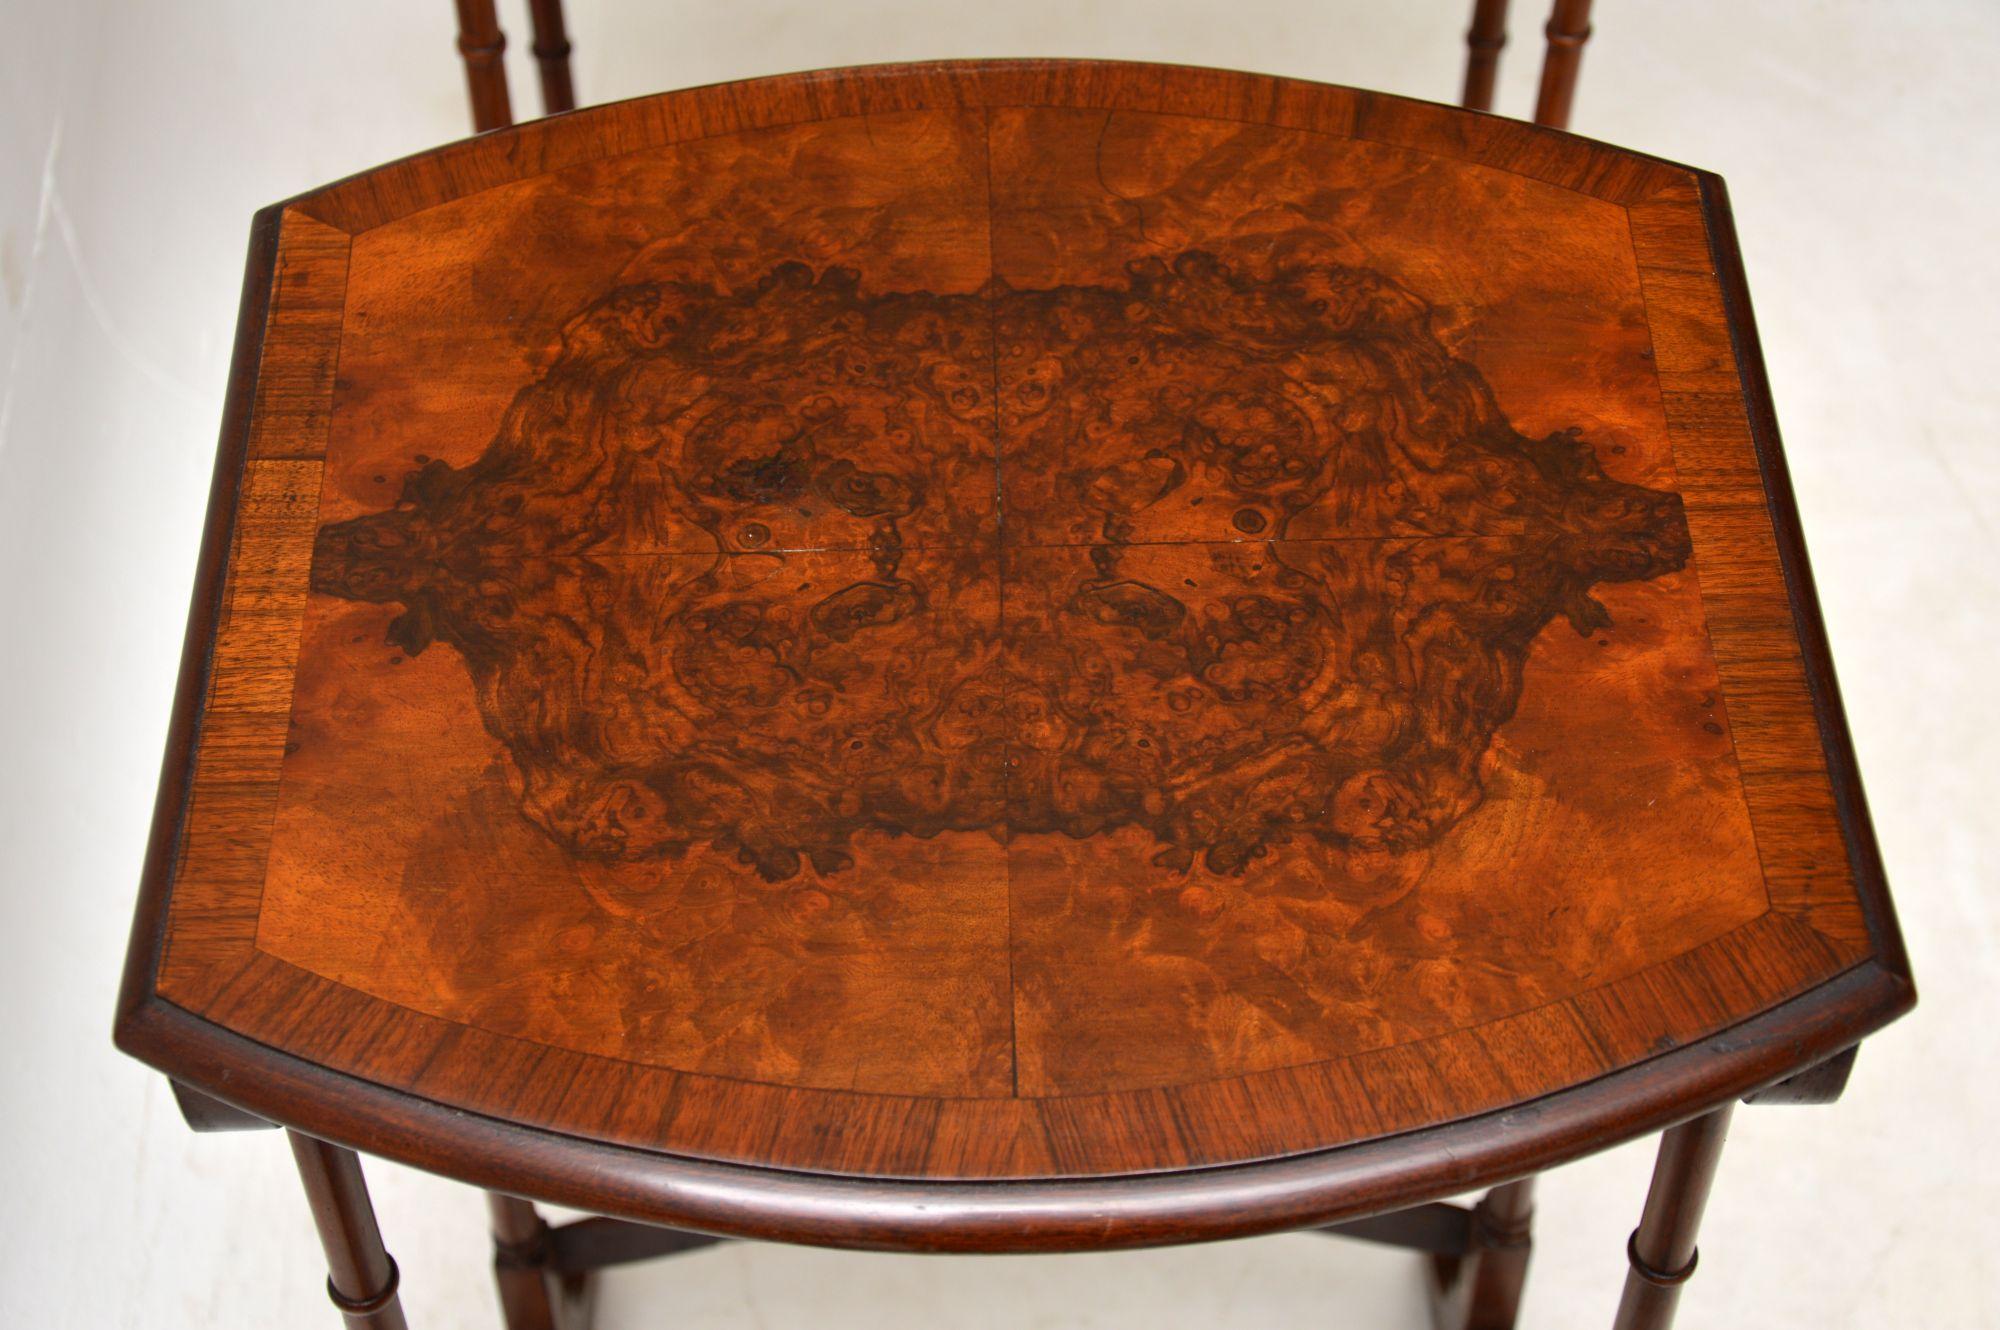 Early 20th Century Antique Burr Walnut Nest of Four Tables